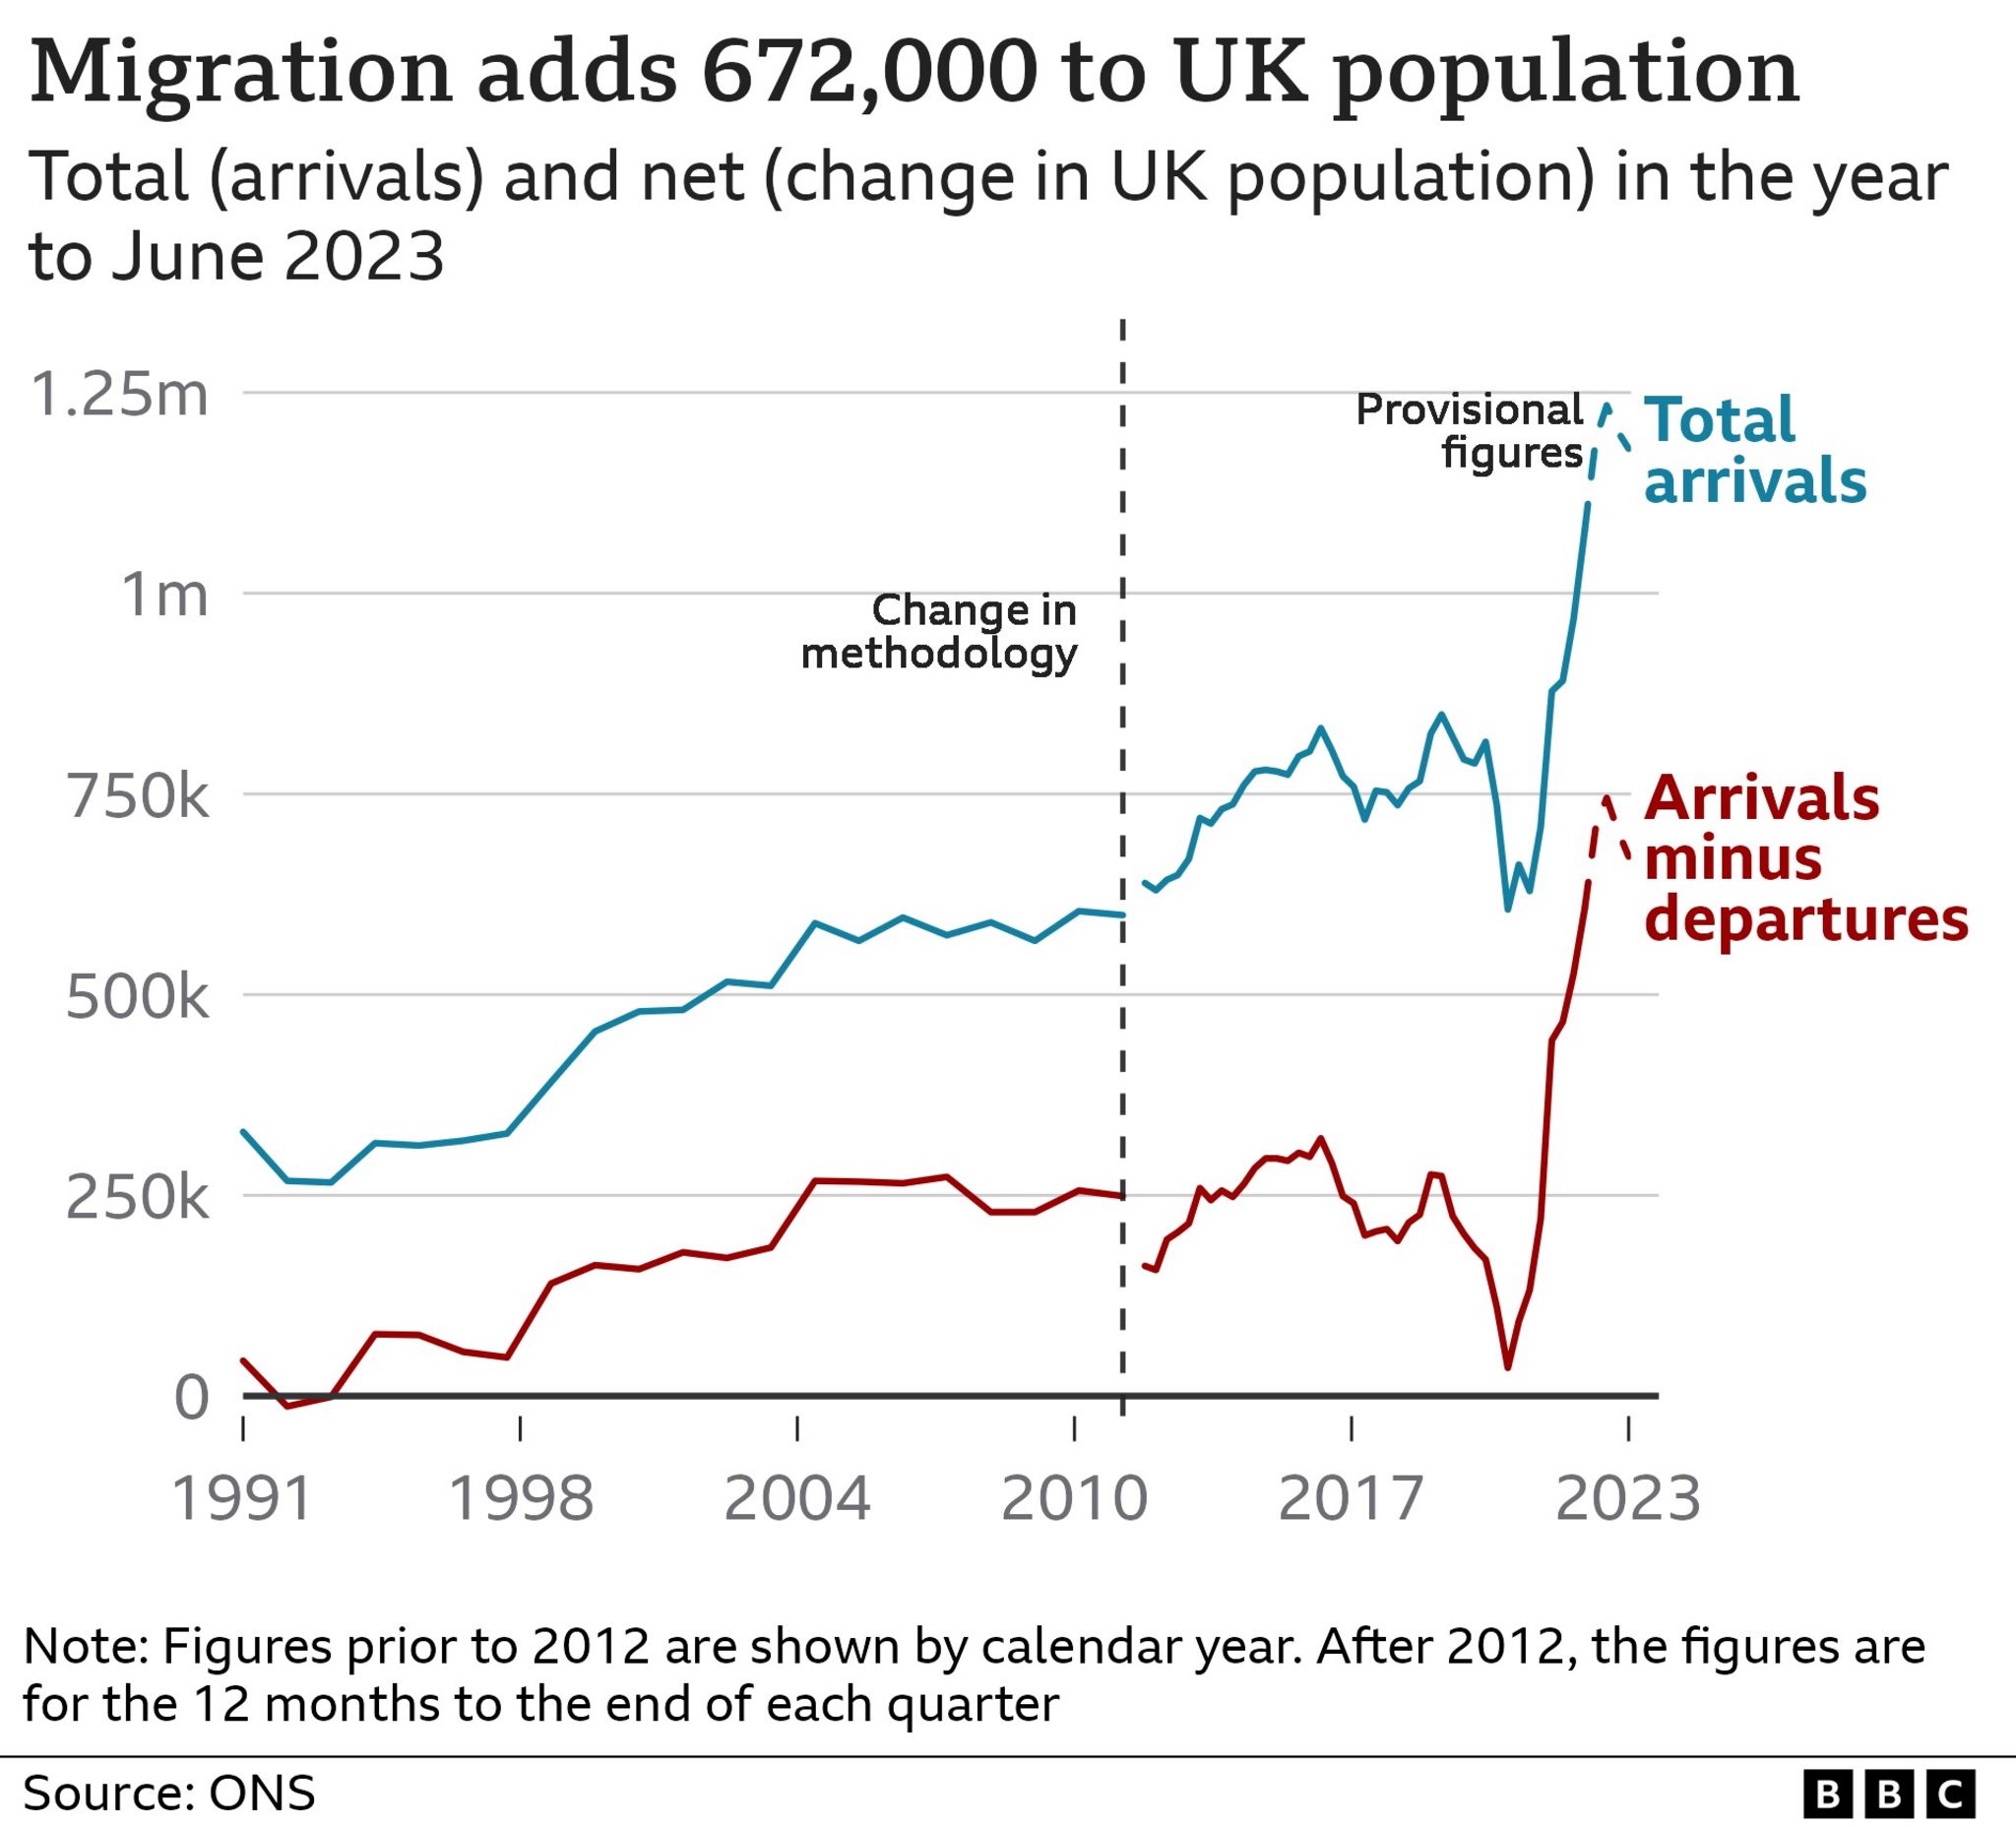 Graph show migration adds 672,000 to UK population